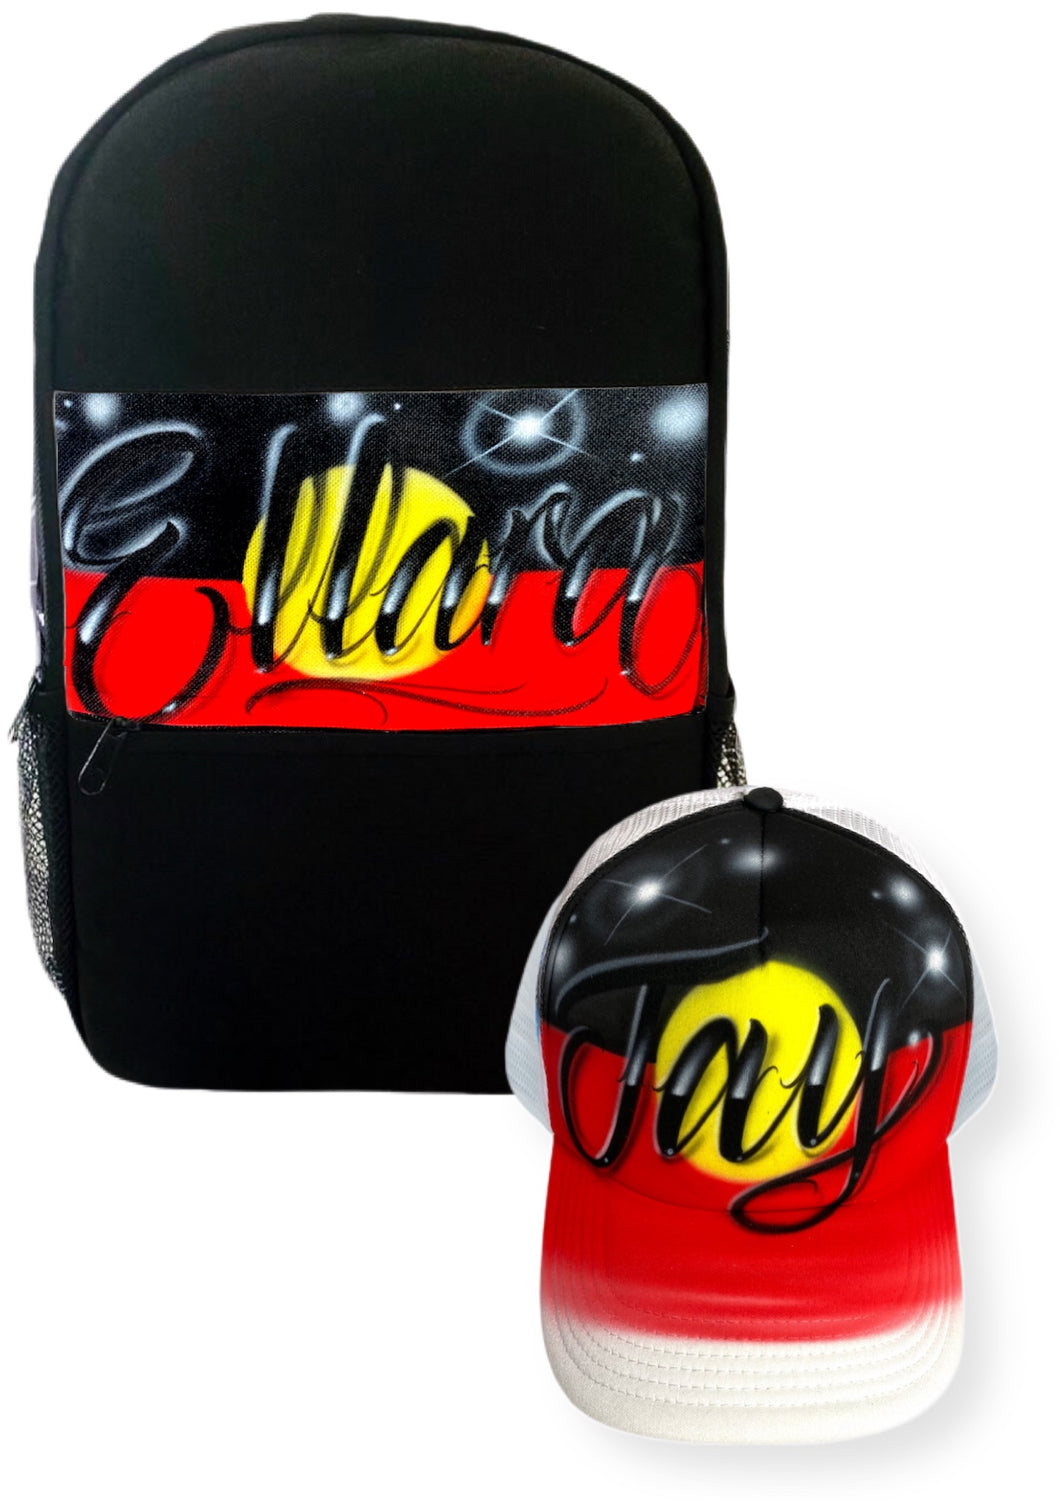 Aboriginal Flag Style Backpack and Cap Combo (Combo2)